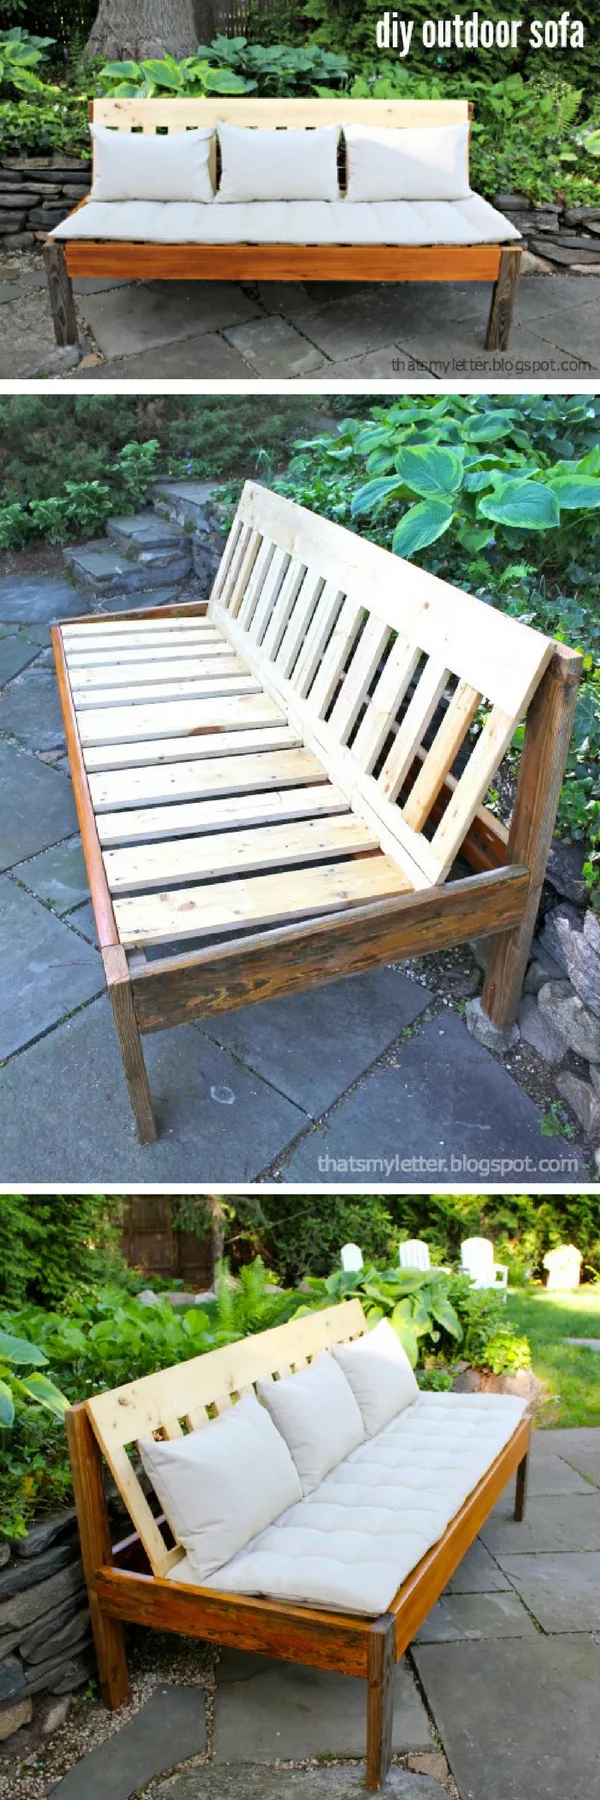 Check out how to make a DIY outdoor sofa yourself